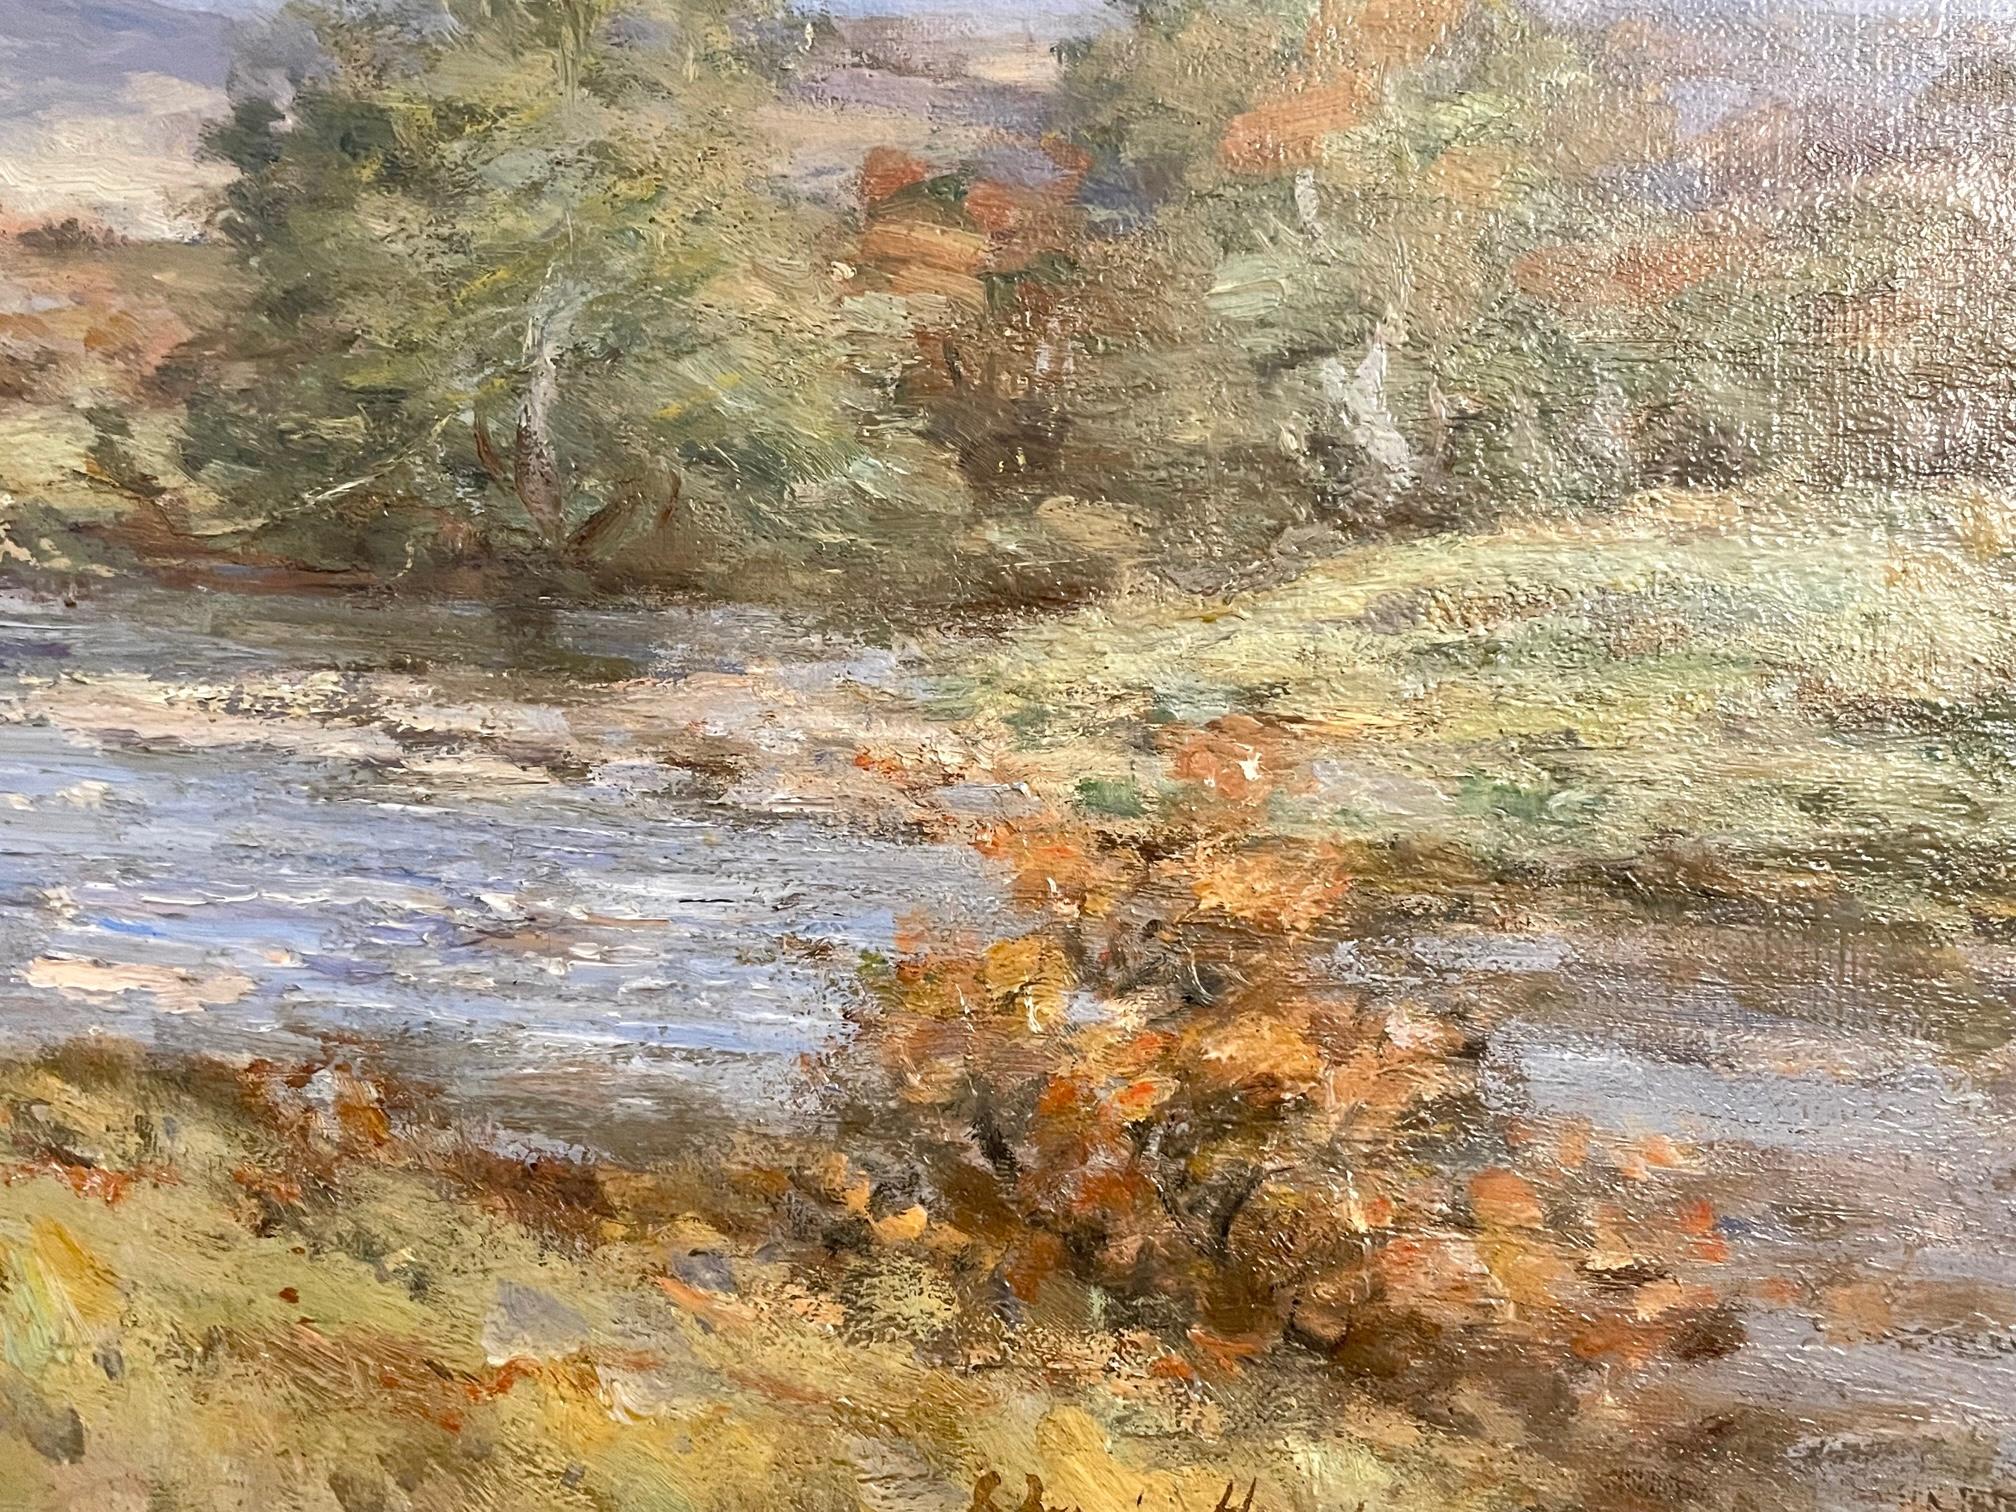 The River in October, Scotland circa 1900 - Brown Landscape Painting by Joseph Morris Henderson